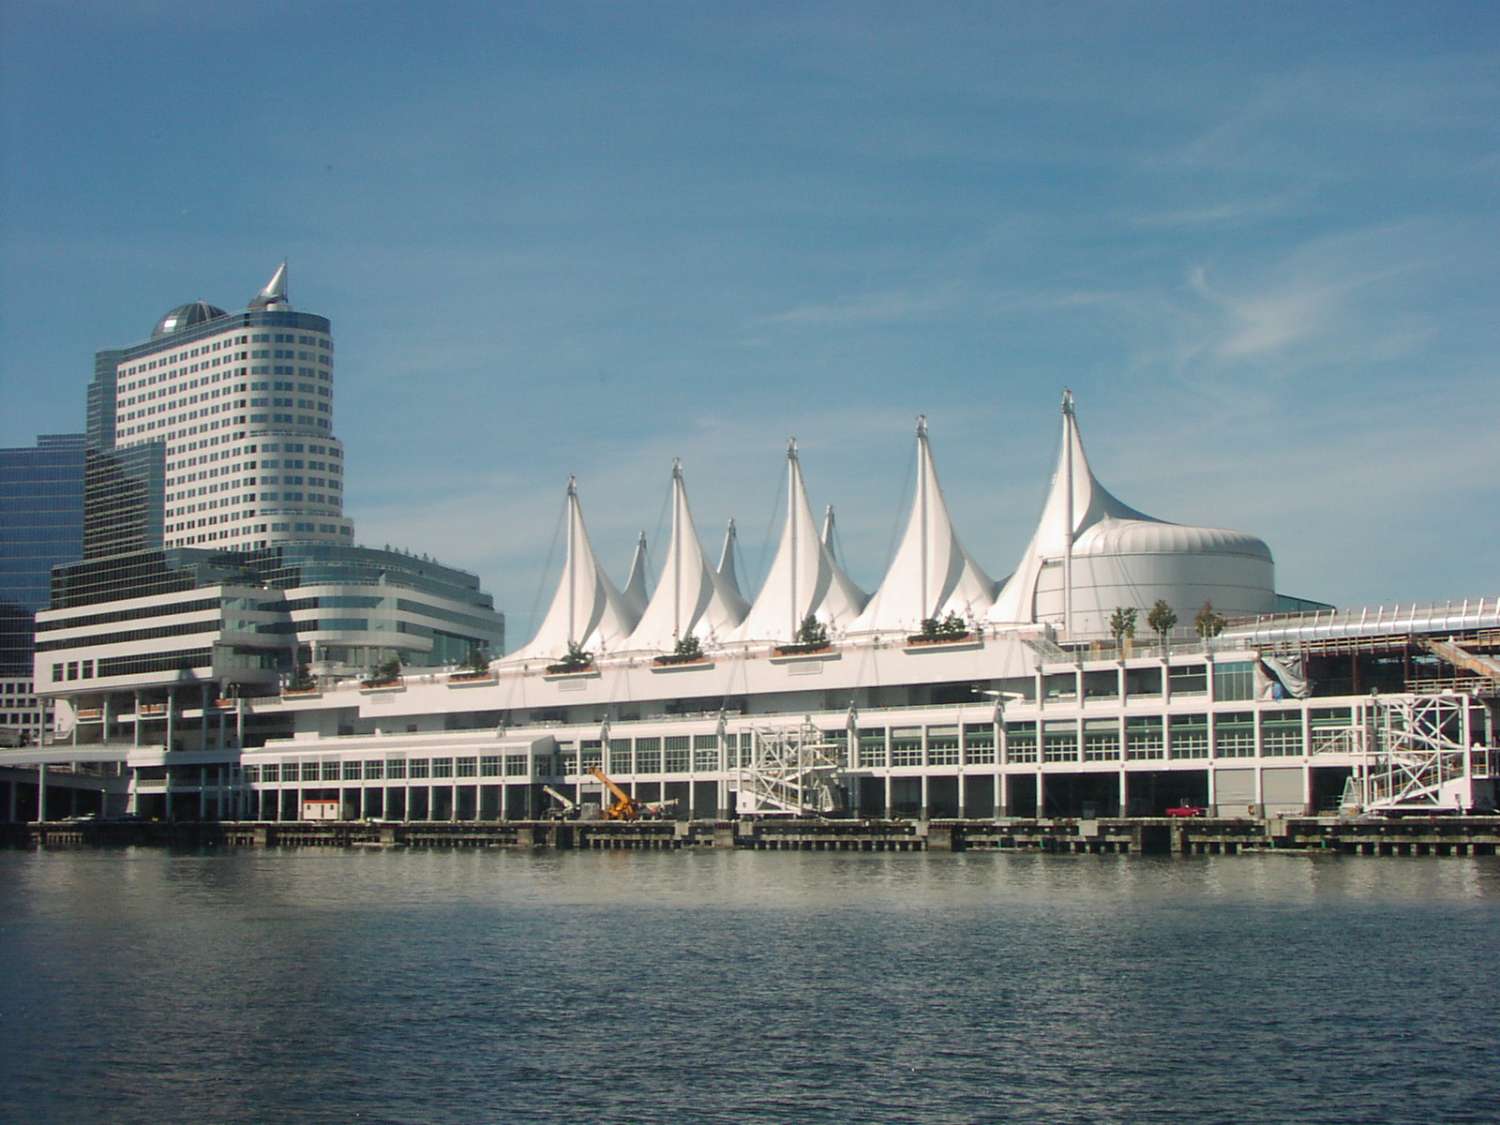 Visit the Vancouver Cruise Ship Terminal